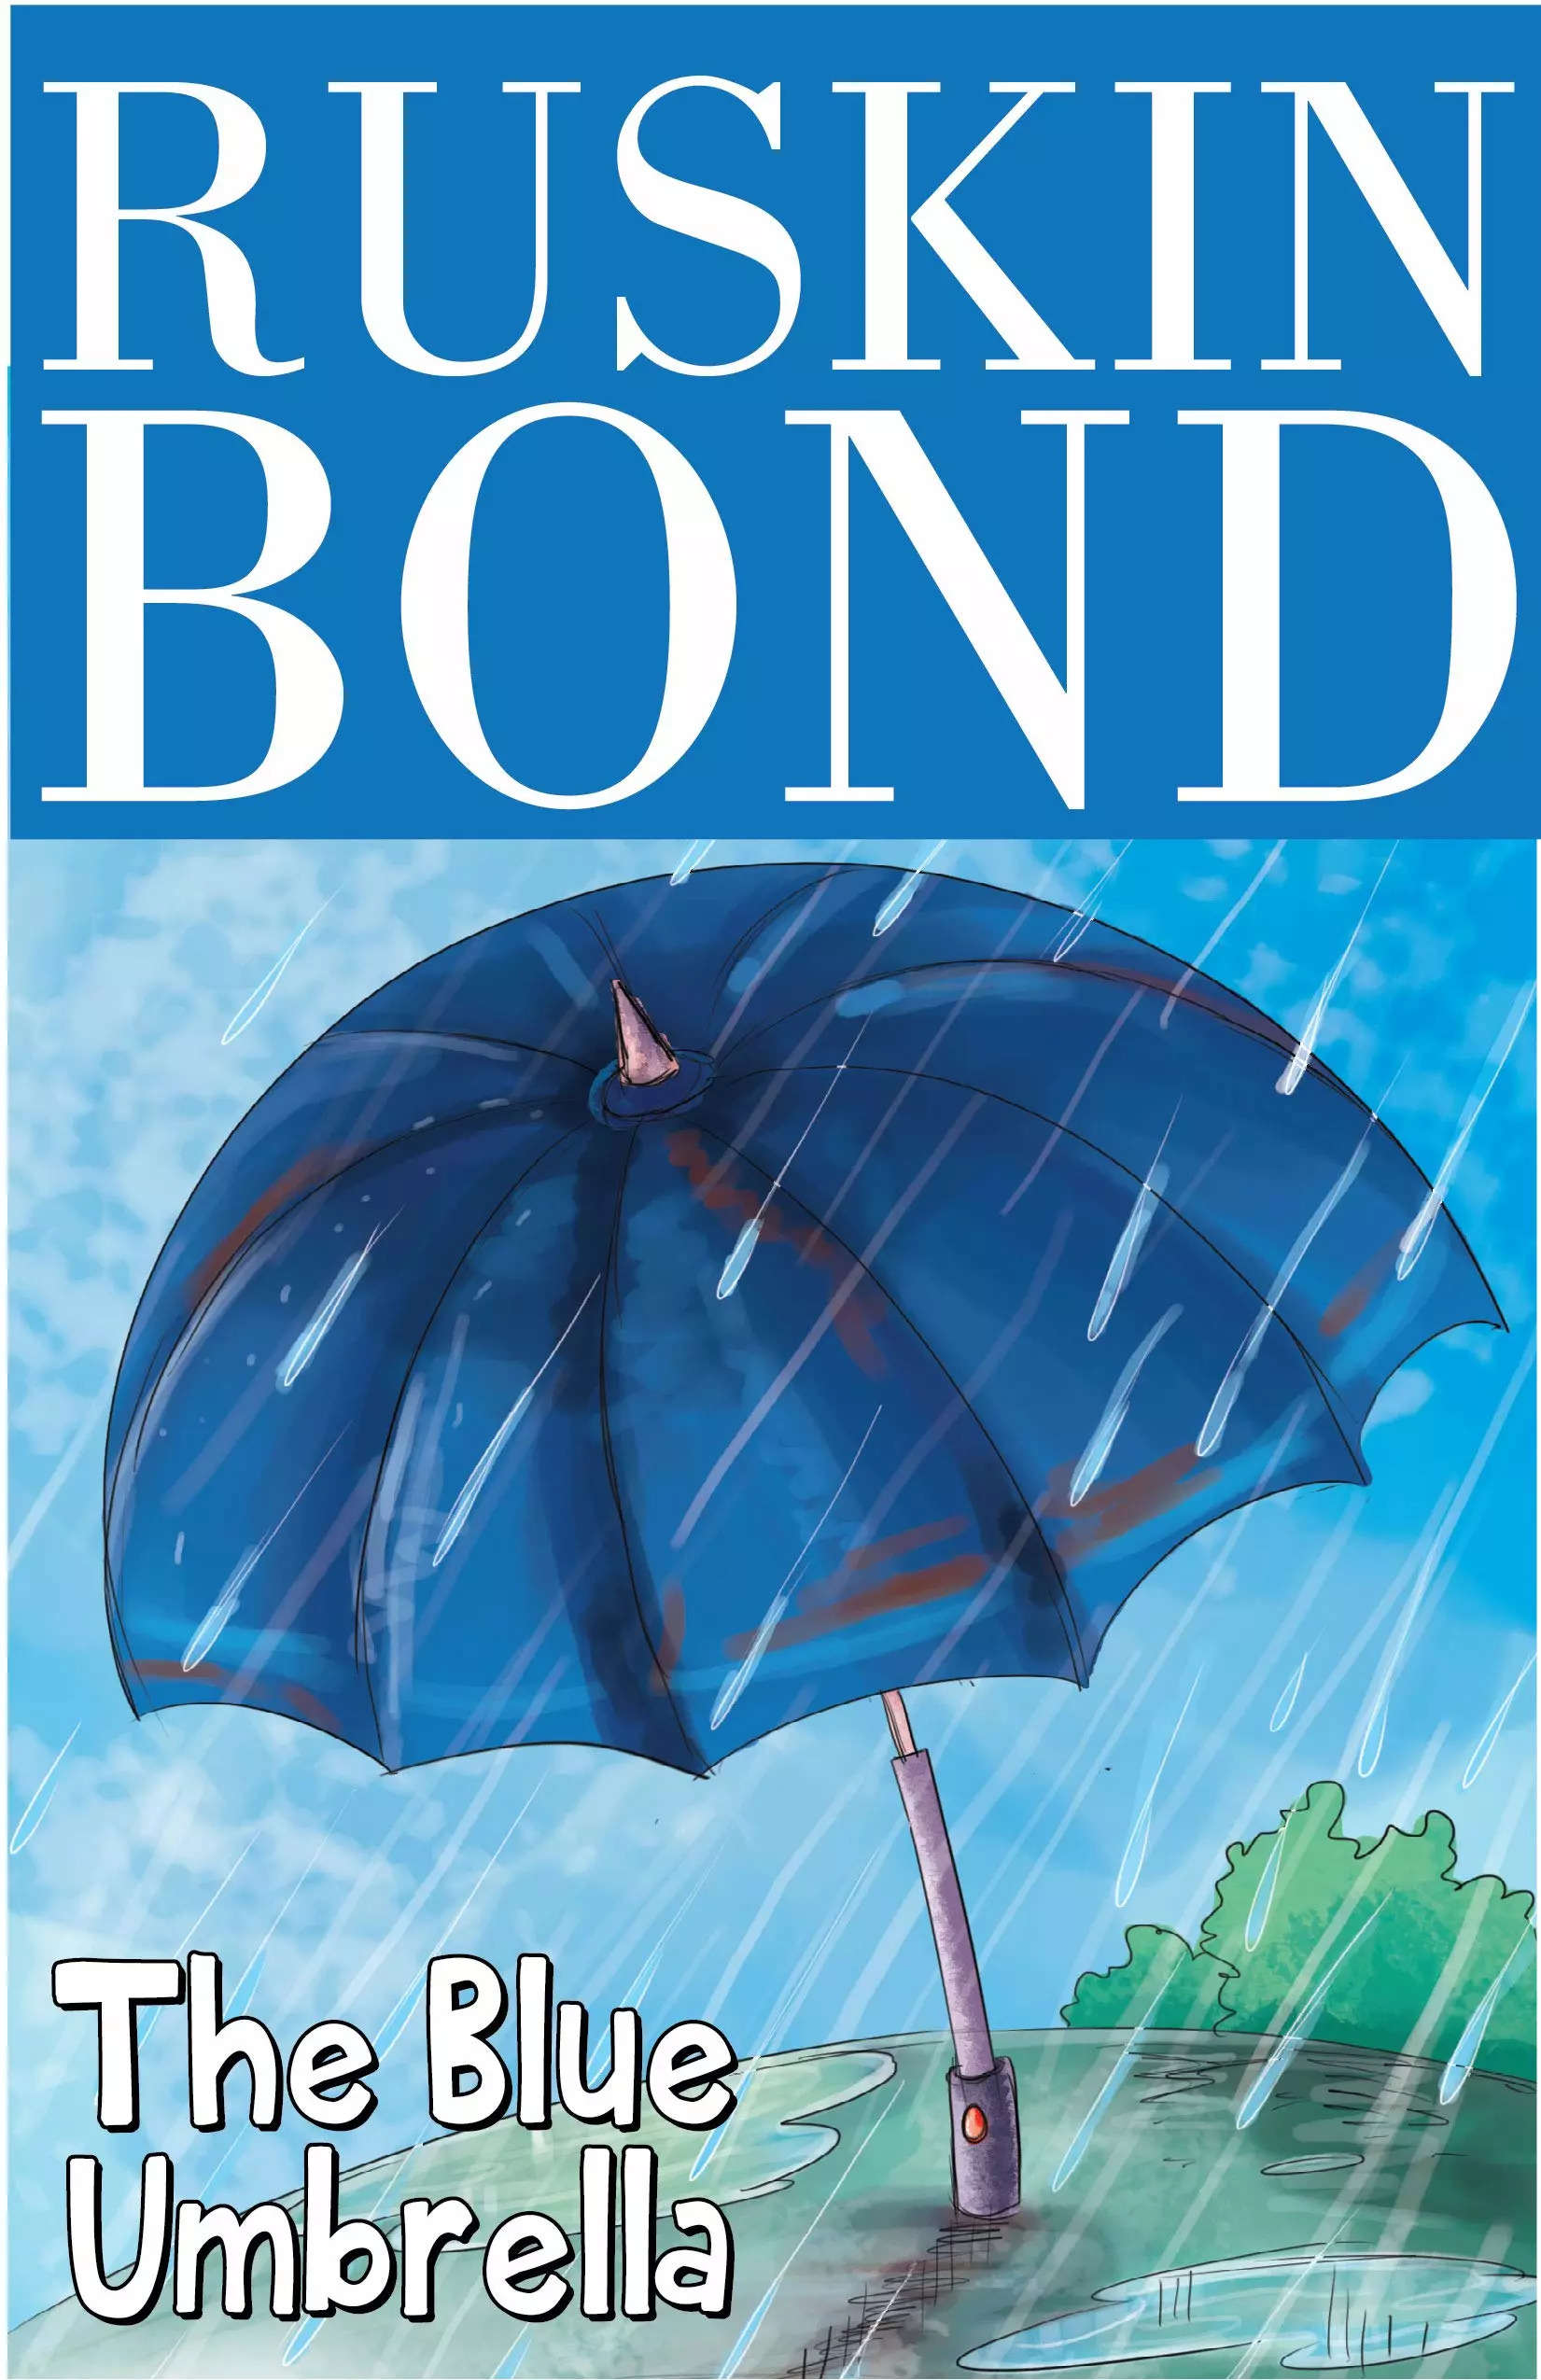 a book review of ruskin bond